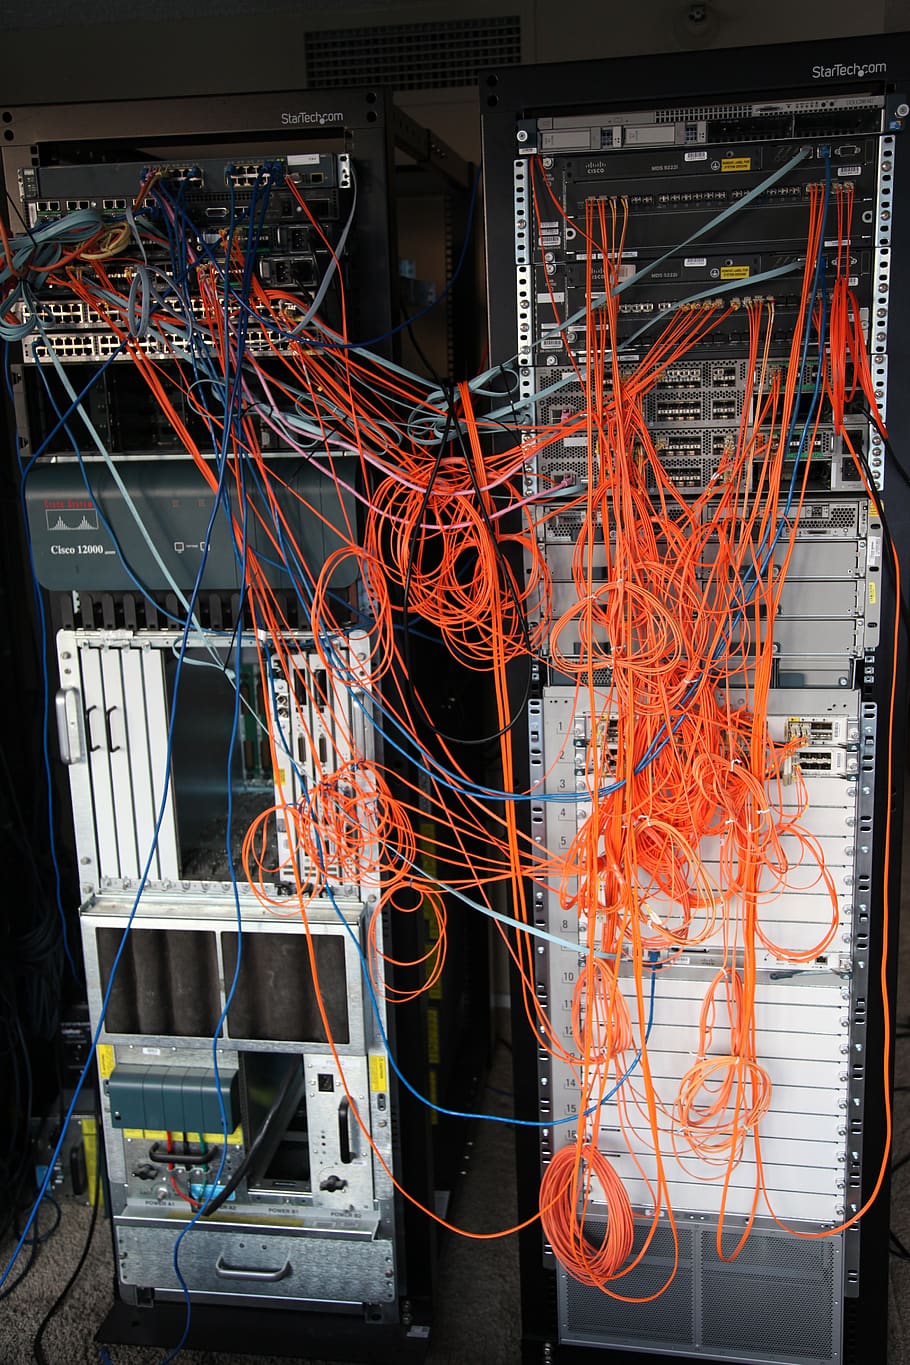 server rack, servers, electronics, cables, technology, chaos, problem, industry, connection, complexity